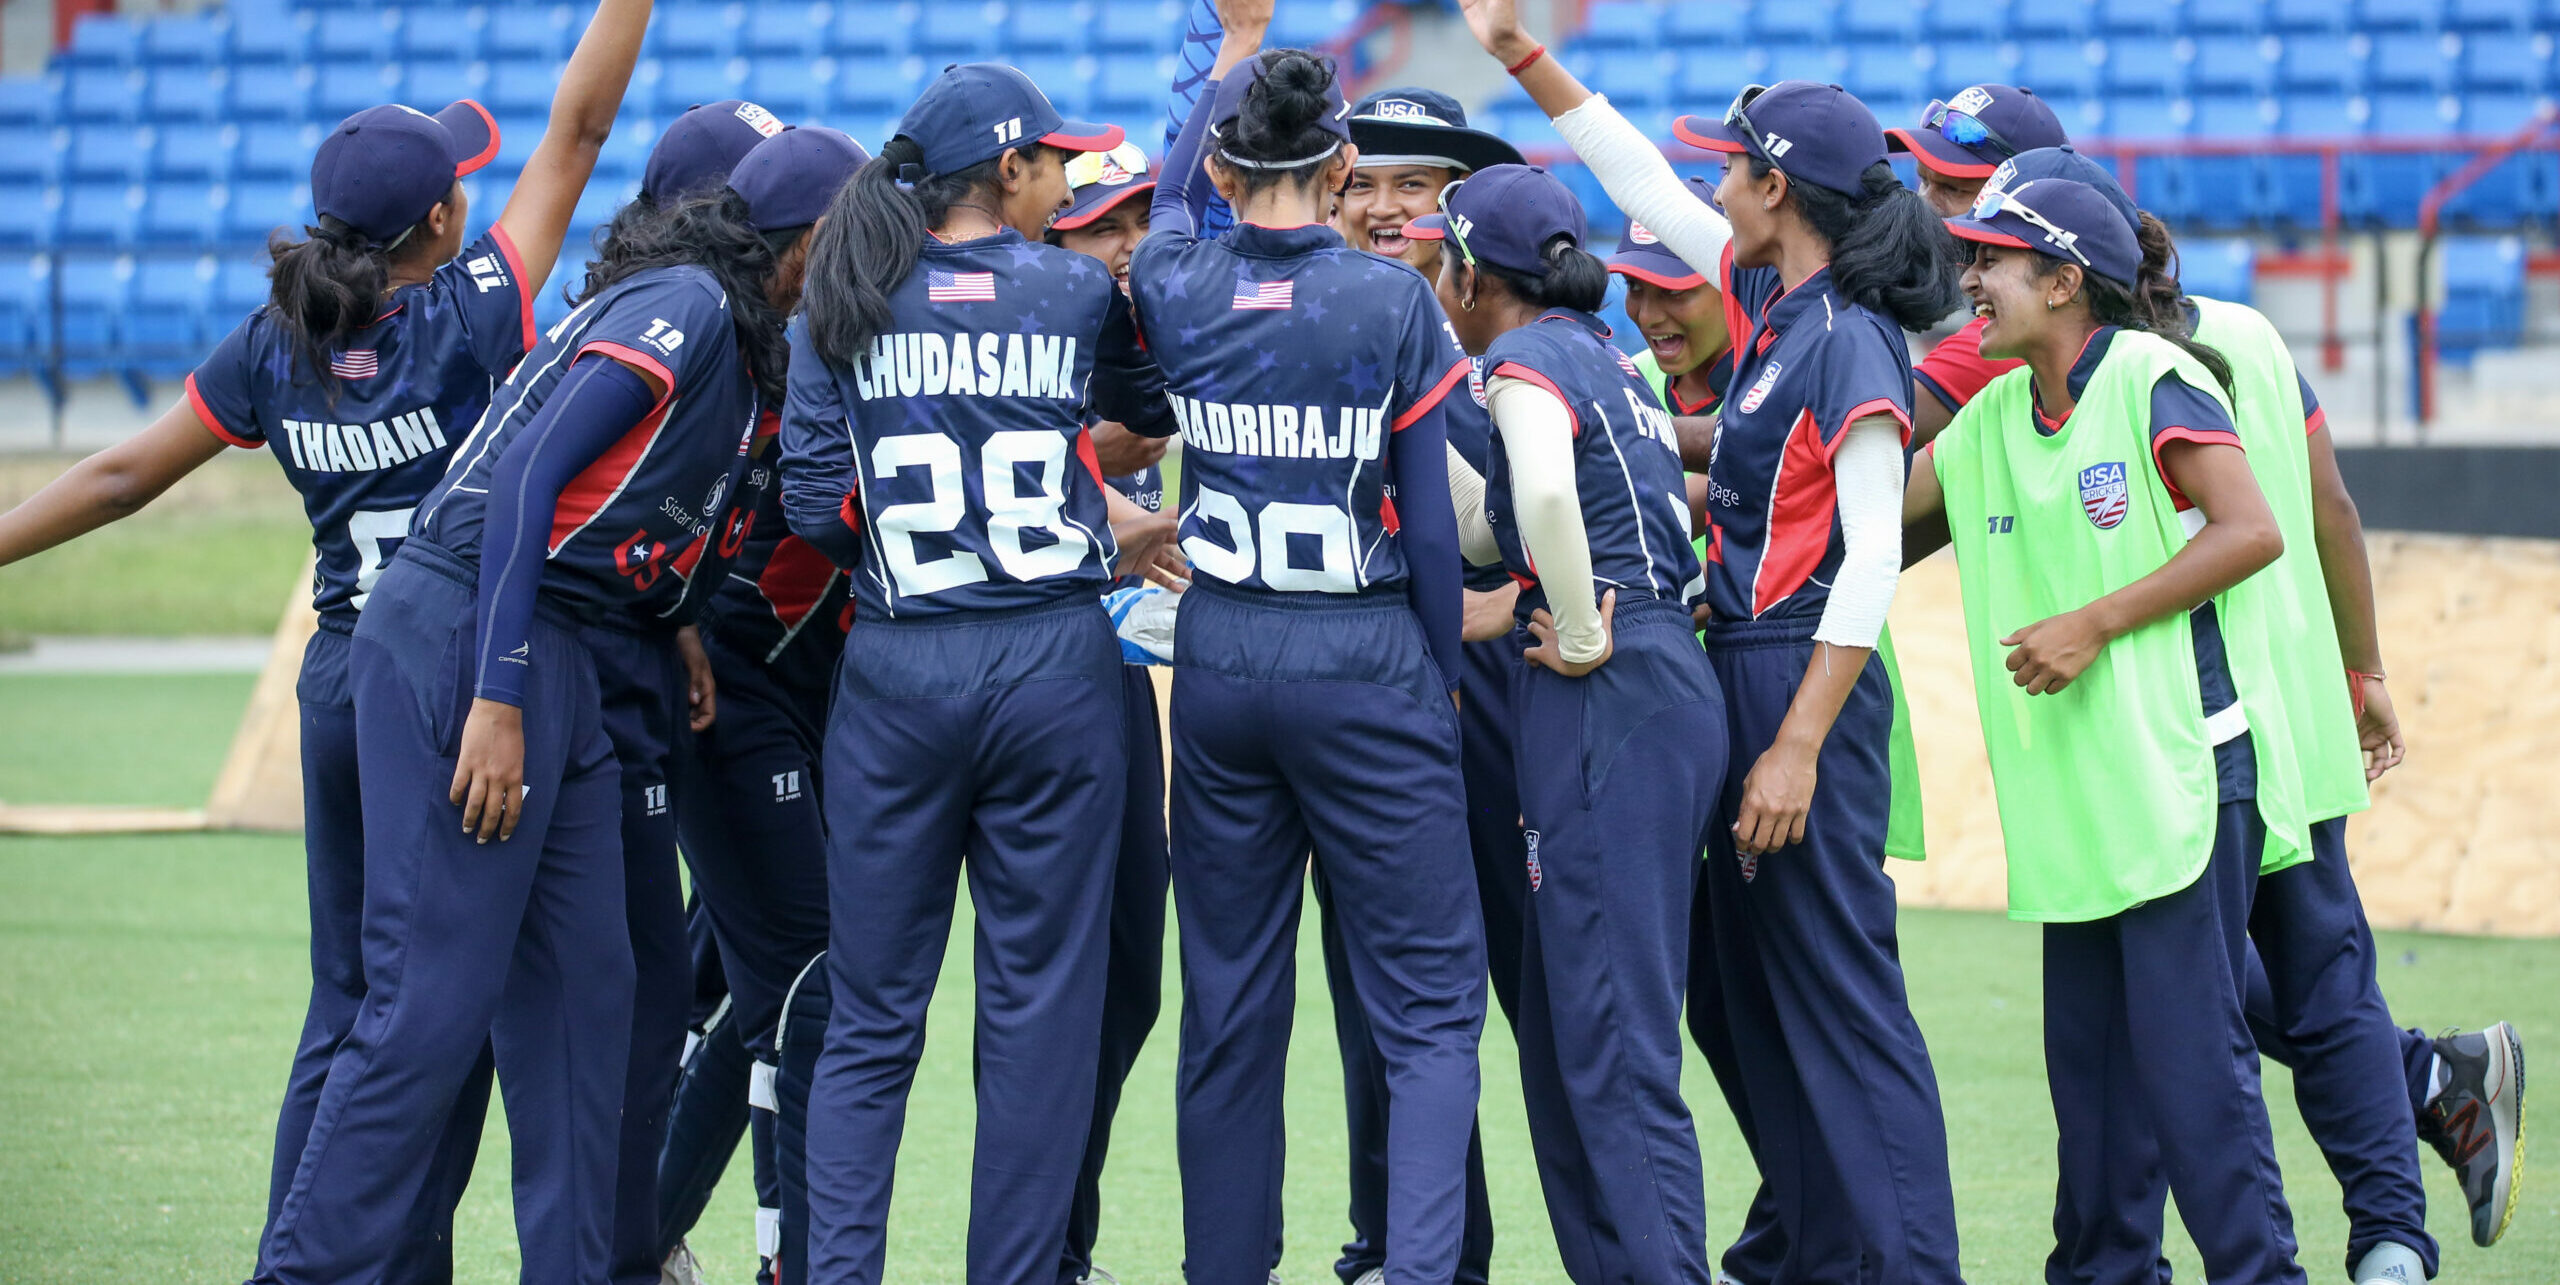 USA CRICKET SEEKS SPONSORS FOR WOMEN’S EVENTS AND PROGRAMS